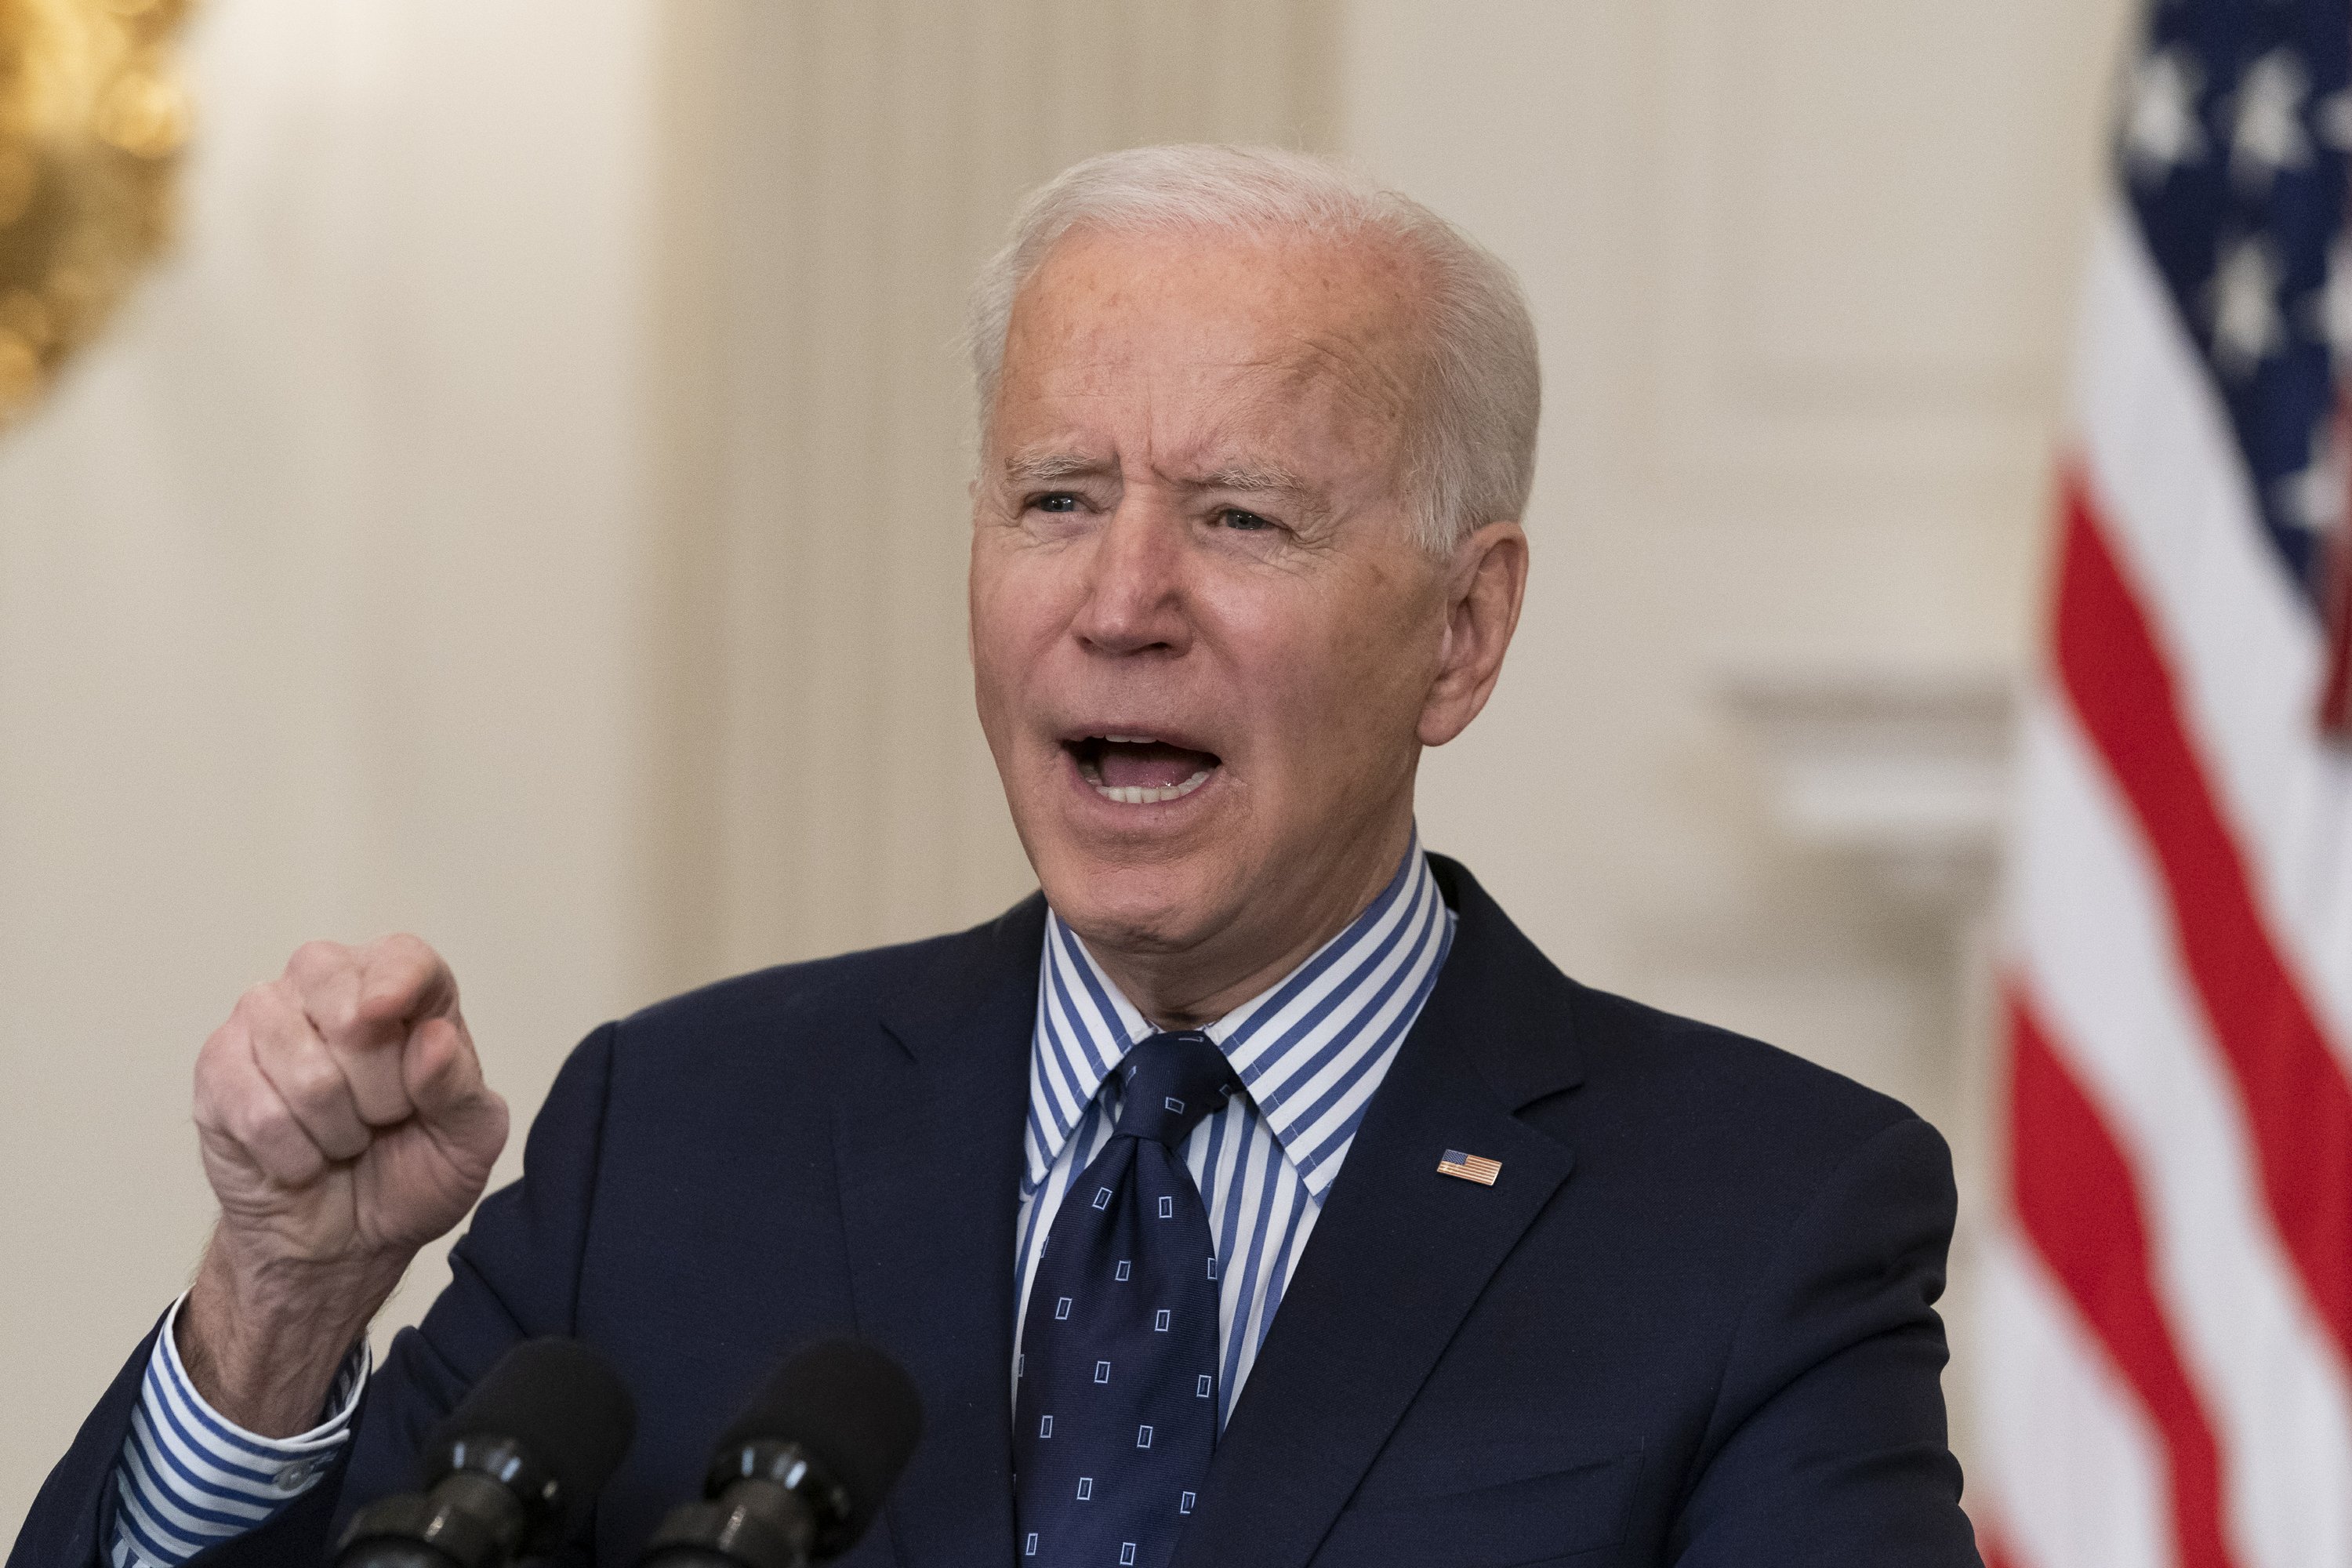 Biden’s order can change the way colleges deal with sexual misconduct